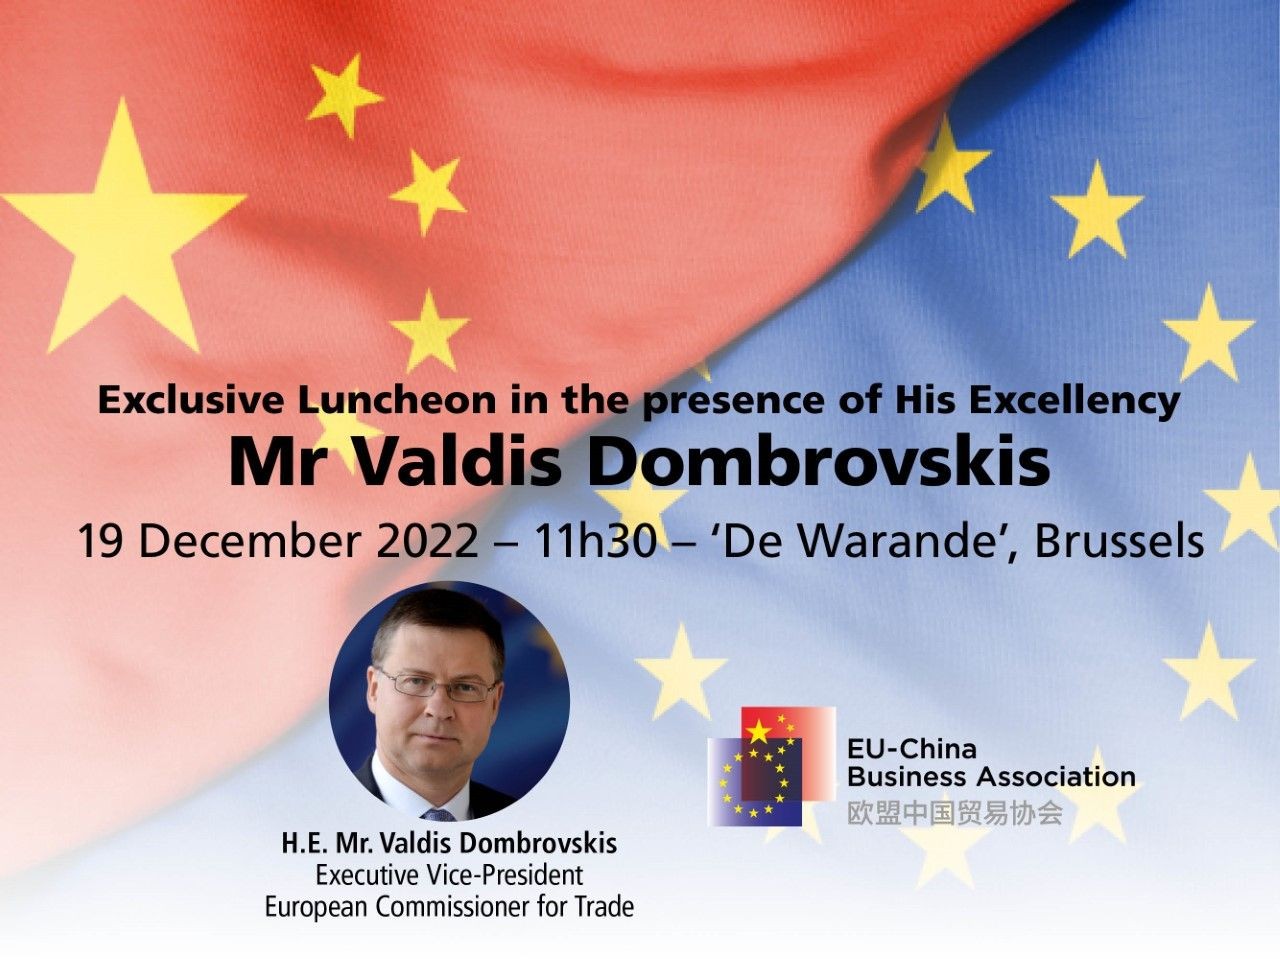 Exclusive Luncheon with His Excellency Mr Valdis Dombrovskis, Executive Vice-President and European Commissioner for Trade – 19/12/2022 – 11h30 – 'De Warande', Brussels